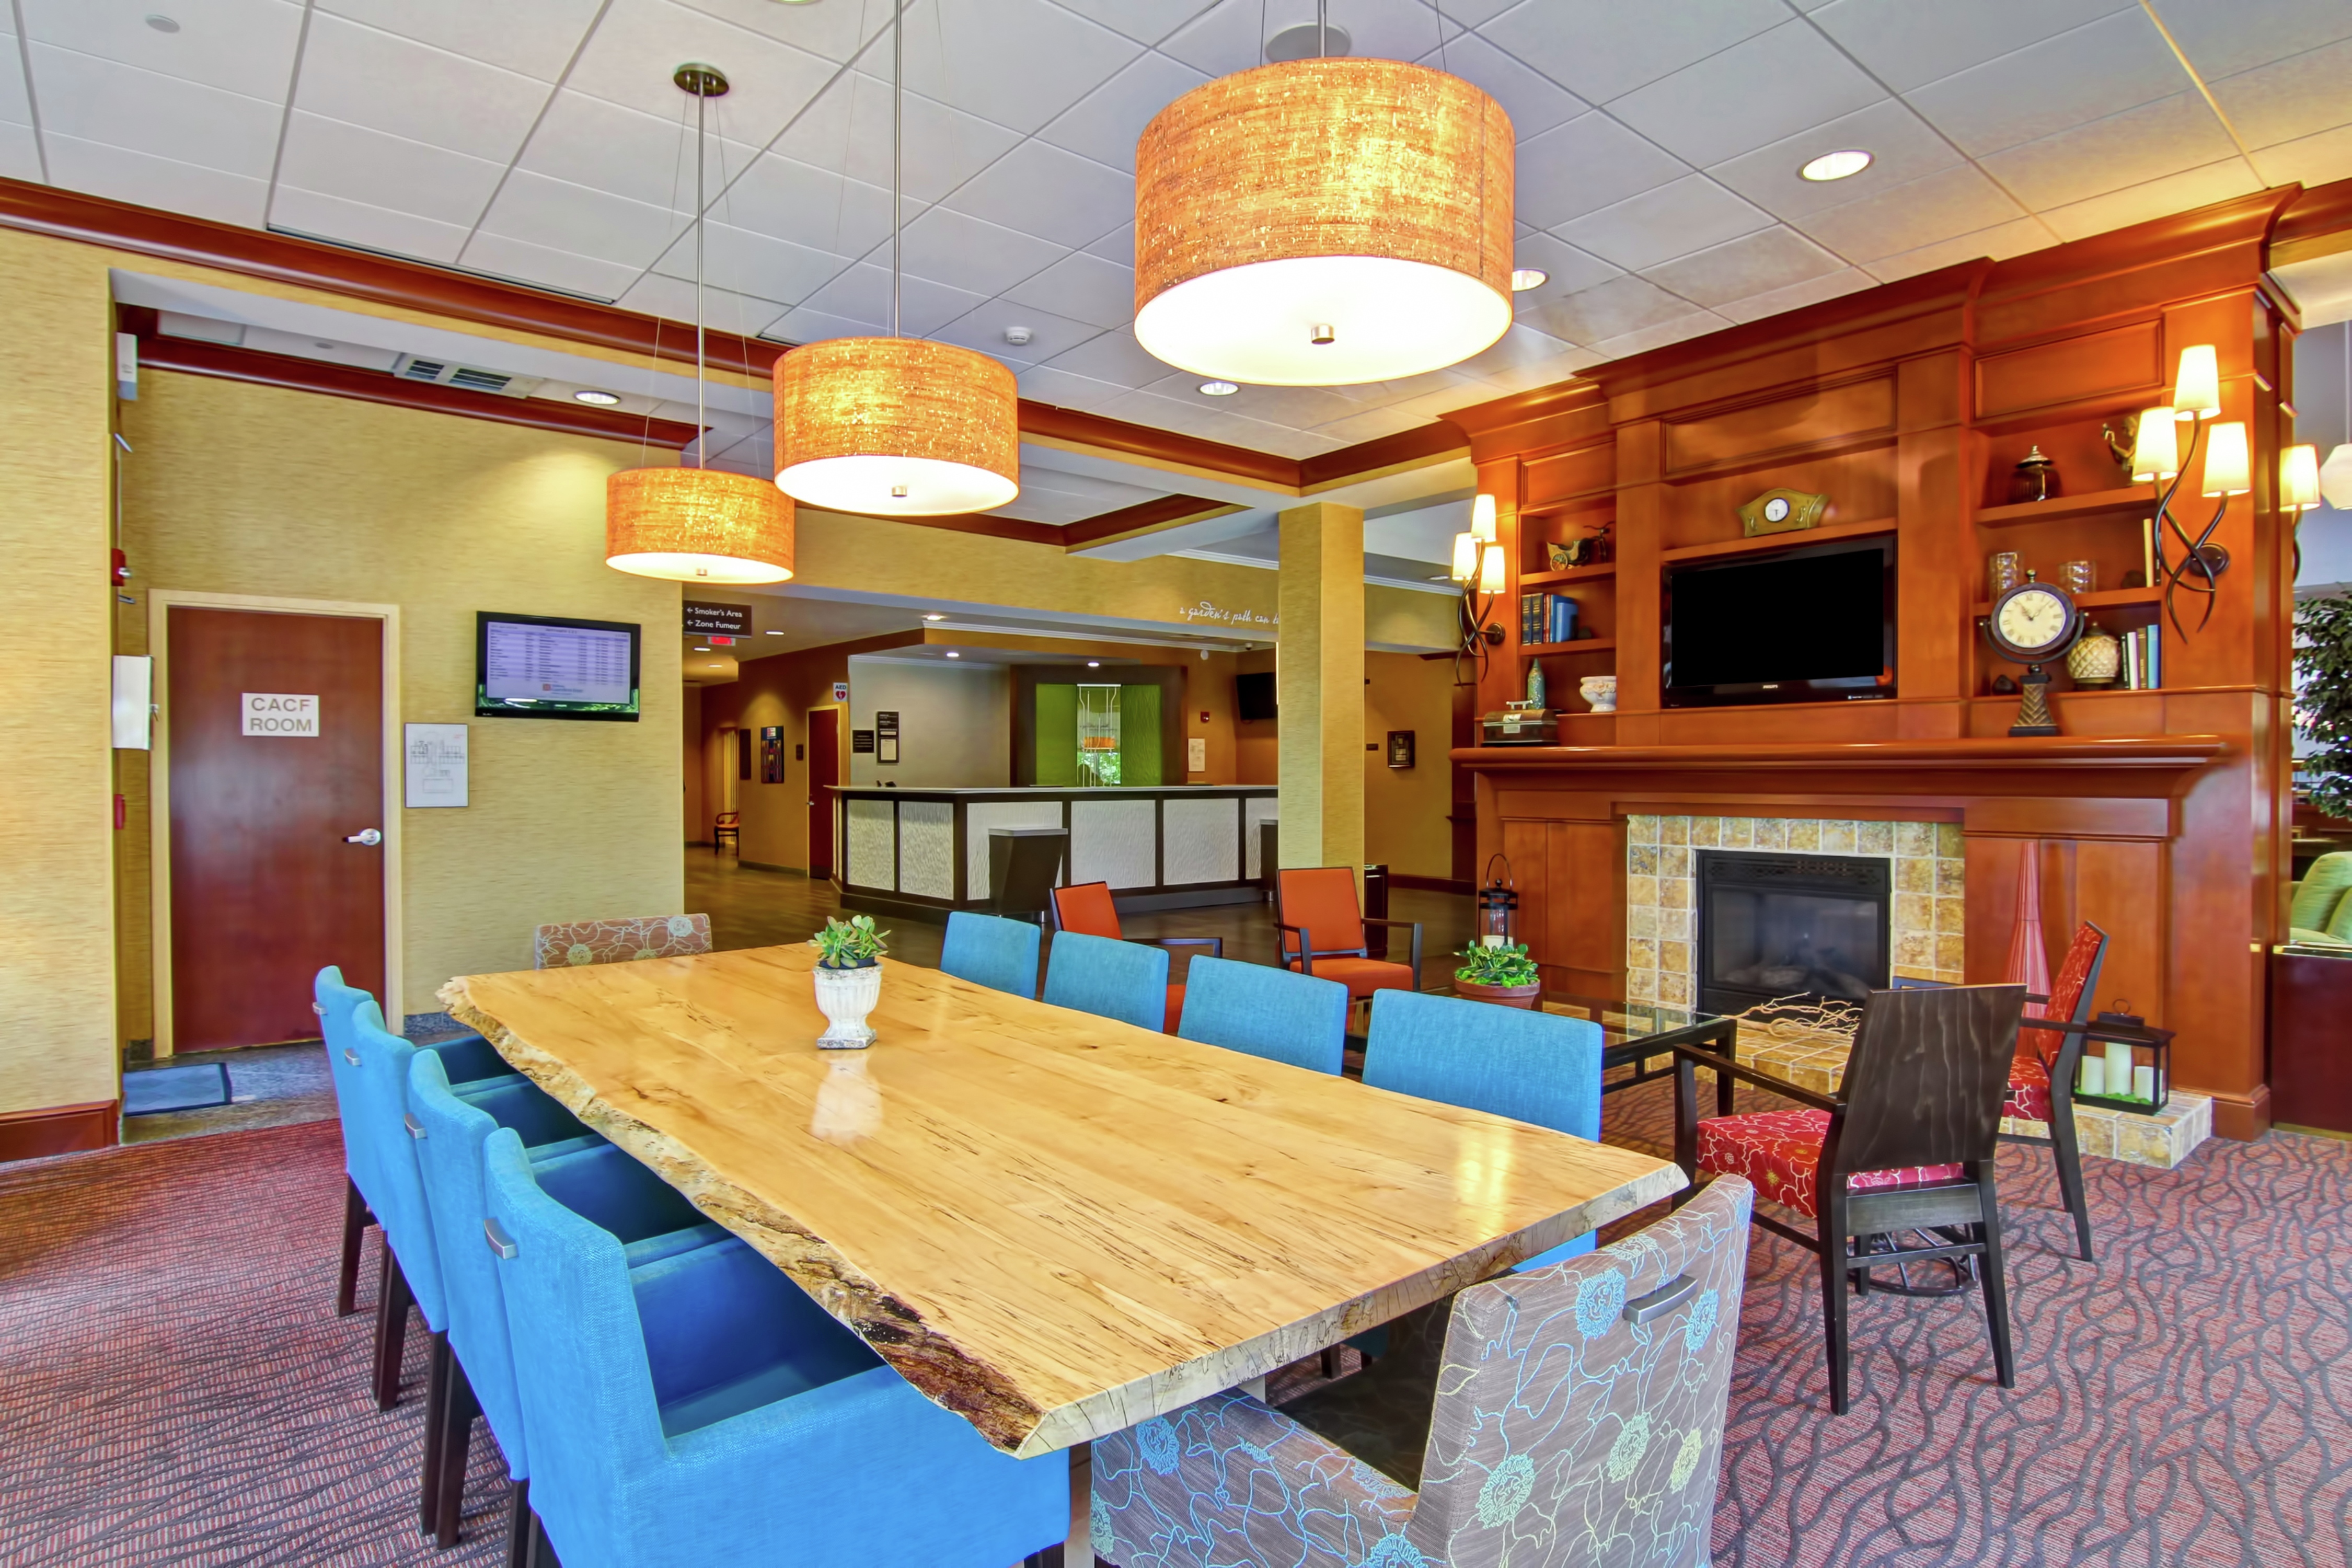 Seating for 10 at Large Table, Additional Seating in Lobby Area With Fireplace and View of Front Desk in Background